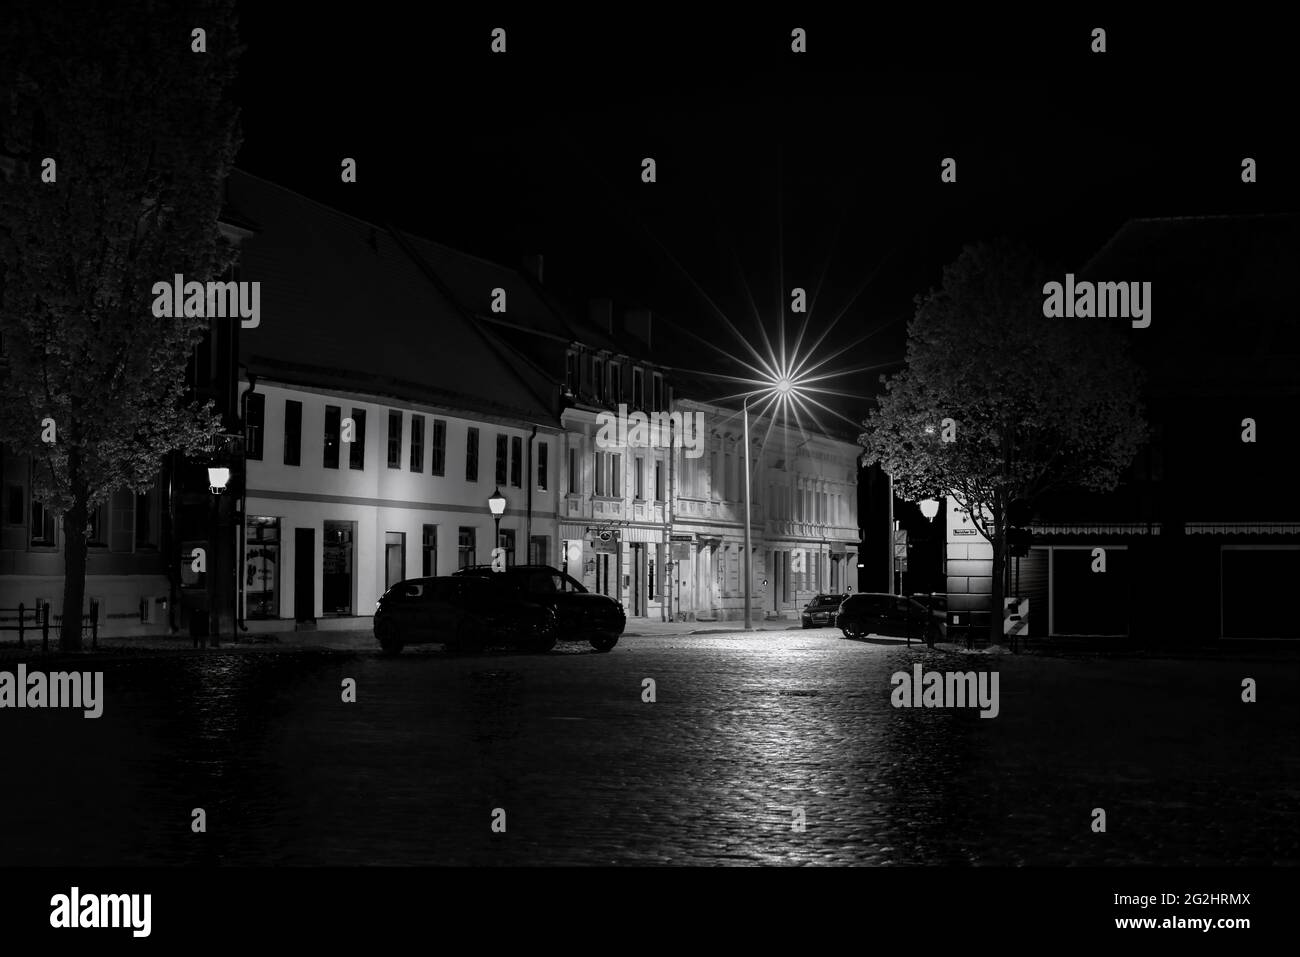 5 May 2021,Germany,City of Luckenwalde,No people on the street during curfew,empty marketplace at night Stock Photo